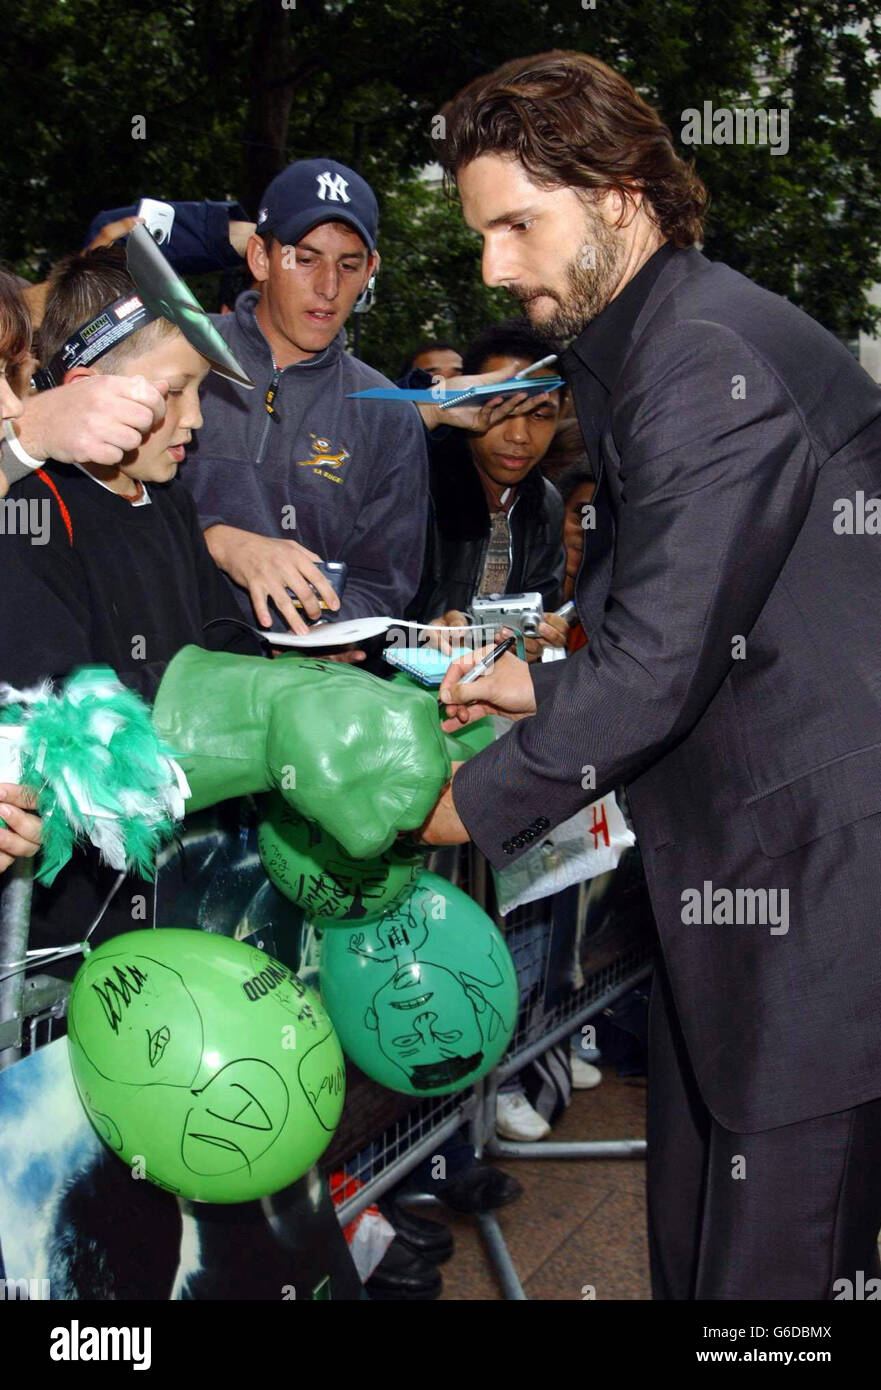 Eric Bana who plays the Hulk signs autographs as he arrives at the premiere of The Hulk at the Empire cinema in London's Leicester Square. Stock Photo